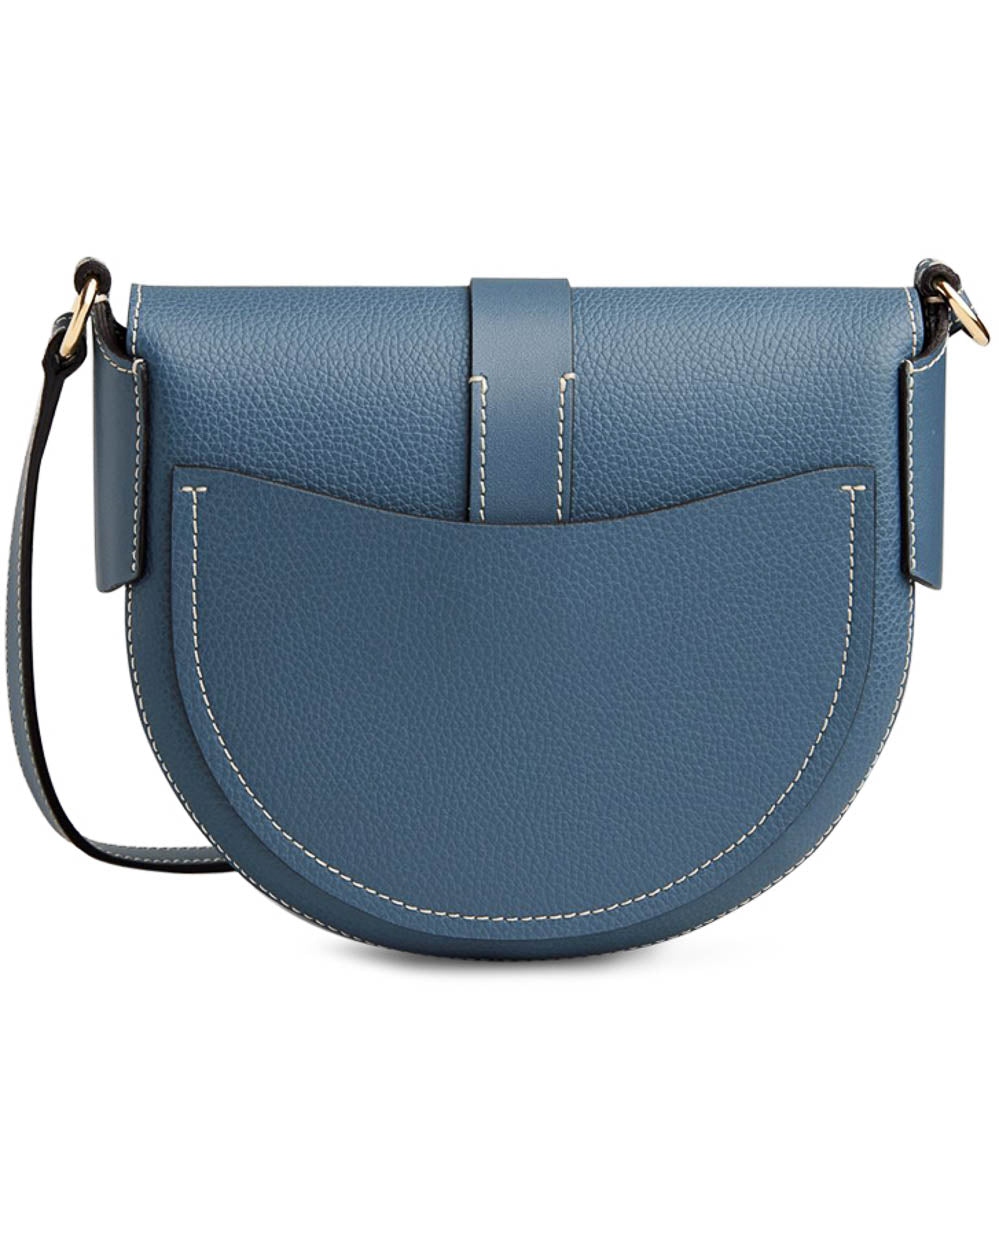 Small Darryl Saddle Bag in Mirage Blue